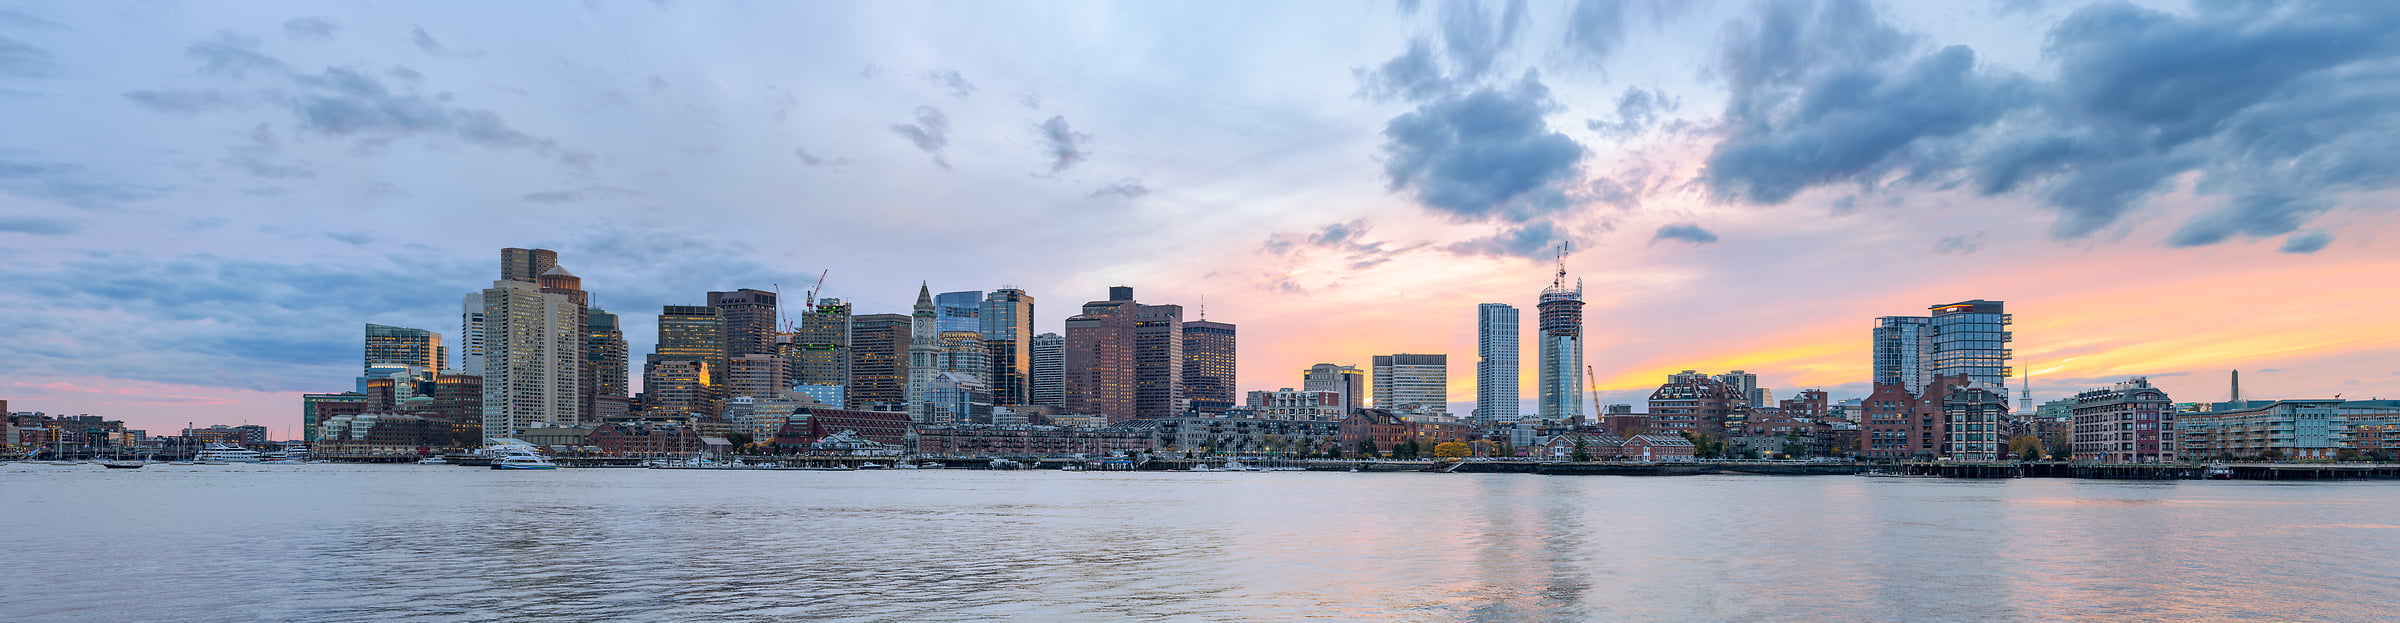 1,014 megapixels! A very high resolution, large-format VAST photo print of the Boston skyline at sunset; cityscape photograph created by Chris Blake in Boston, Massachusetts